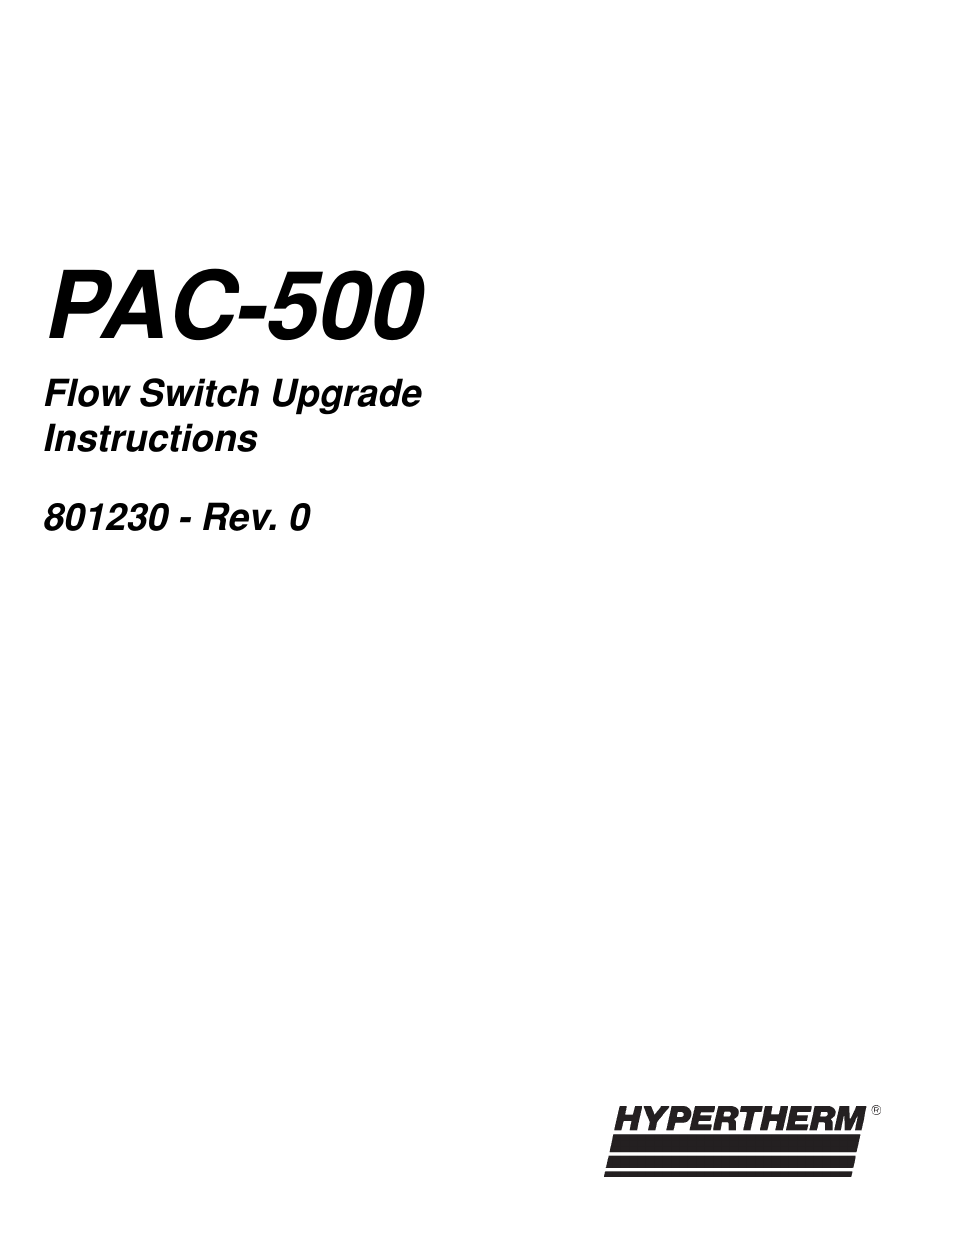 PAC500 Flow Switch Upgrade